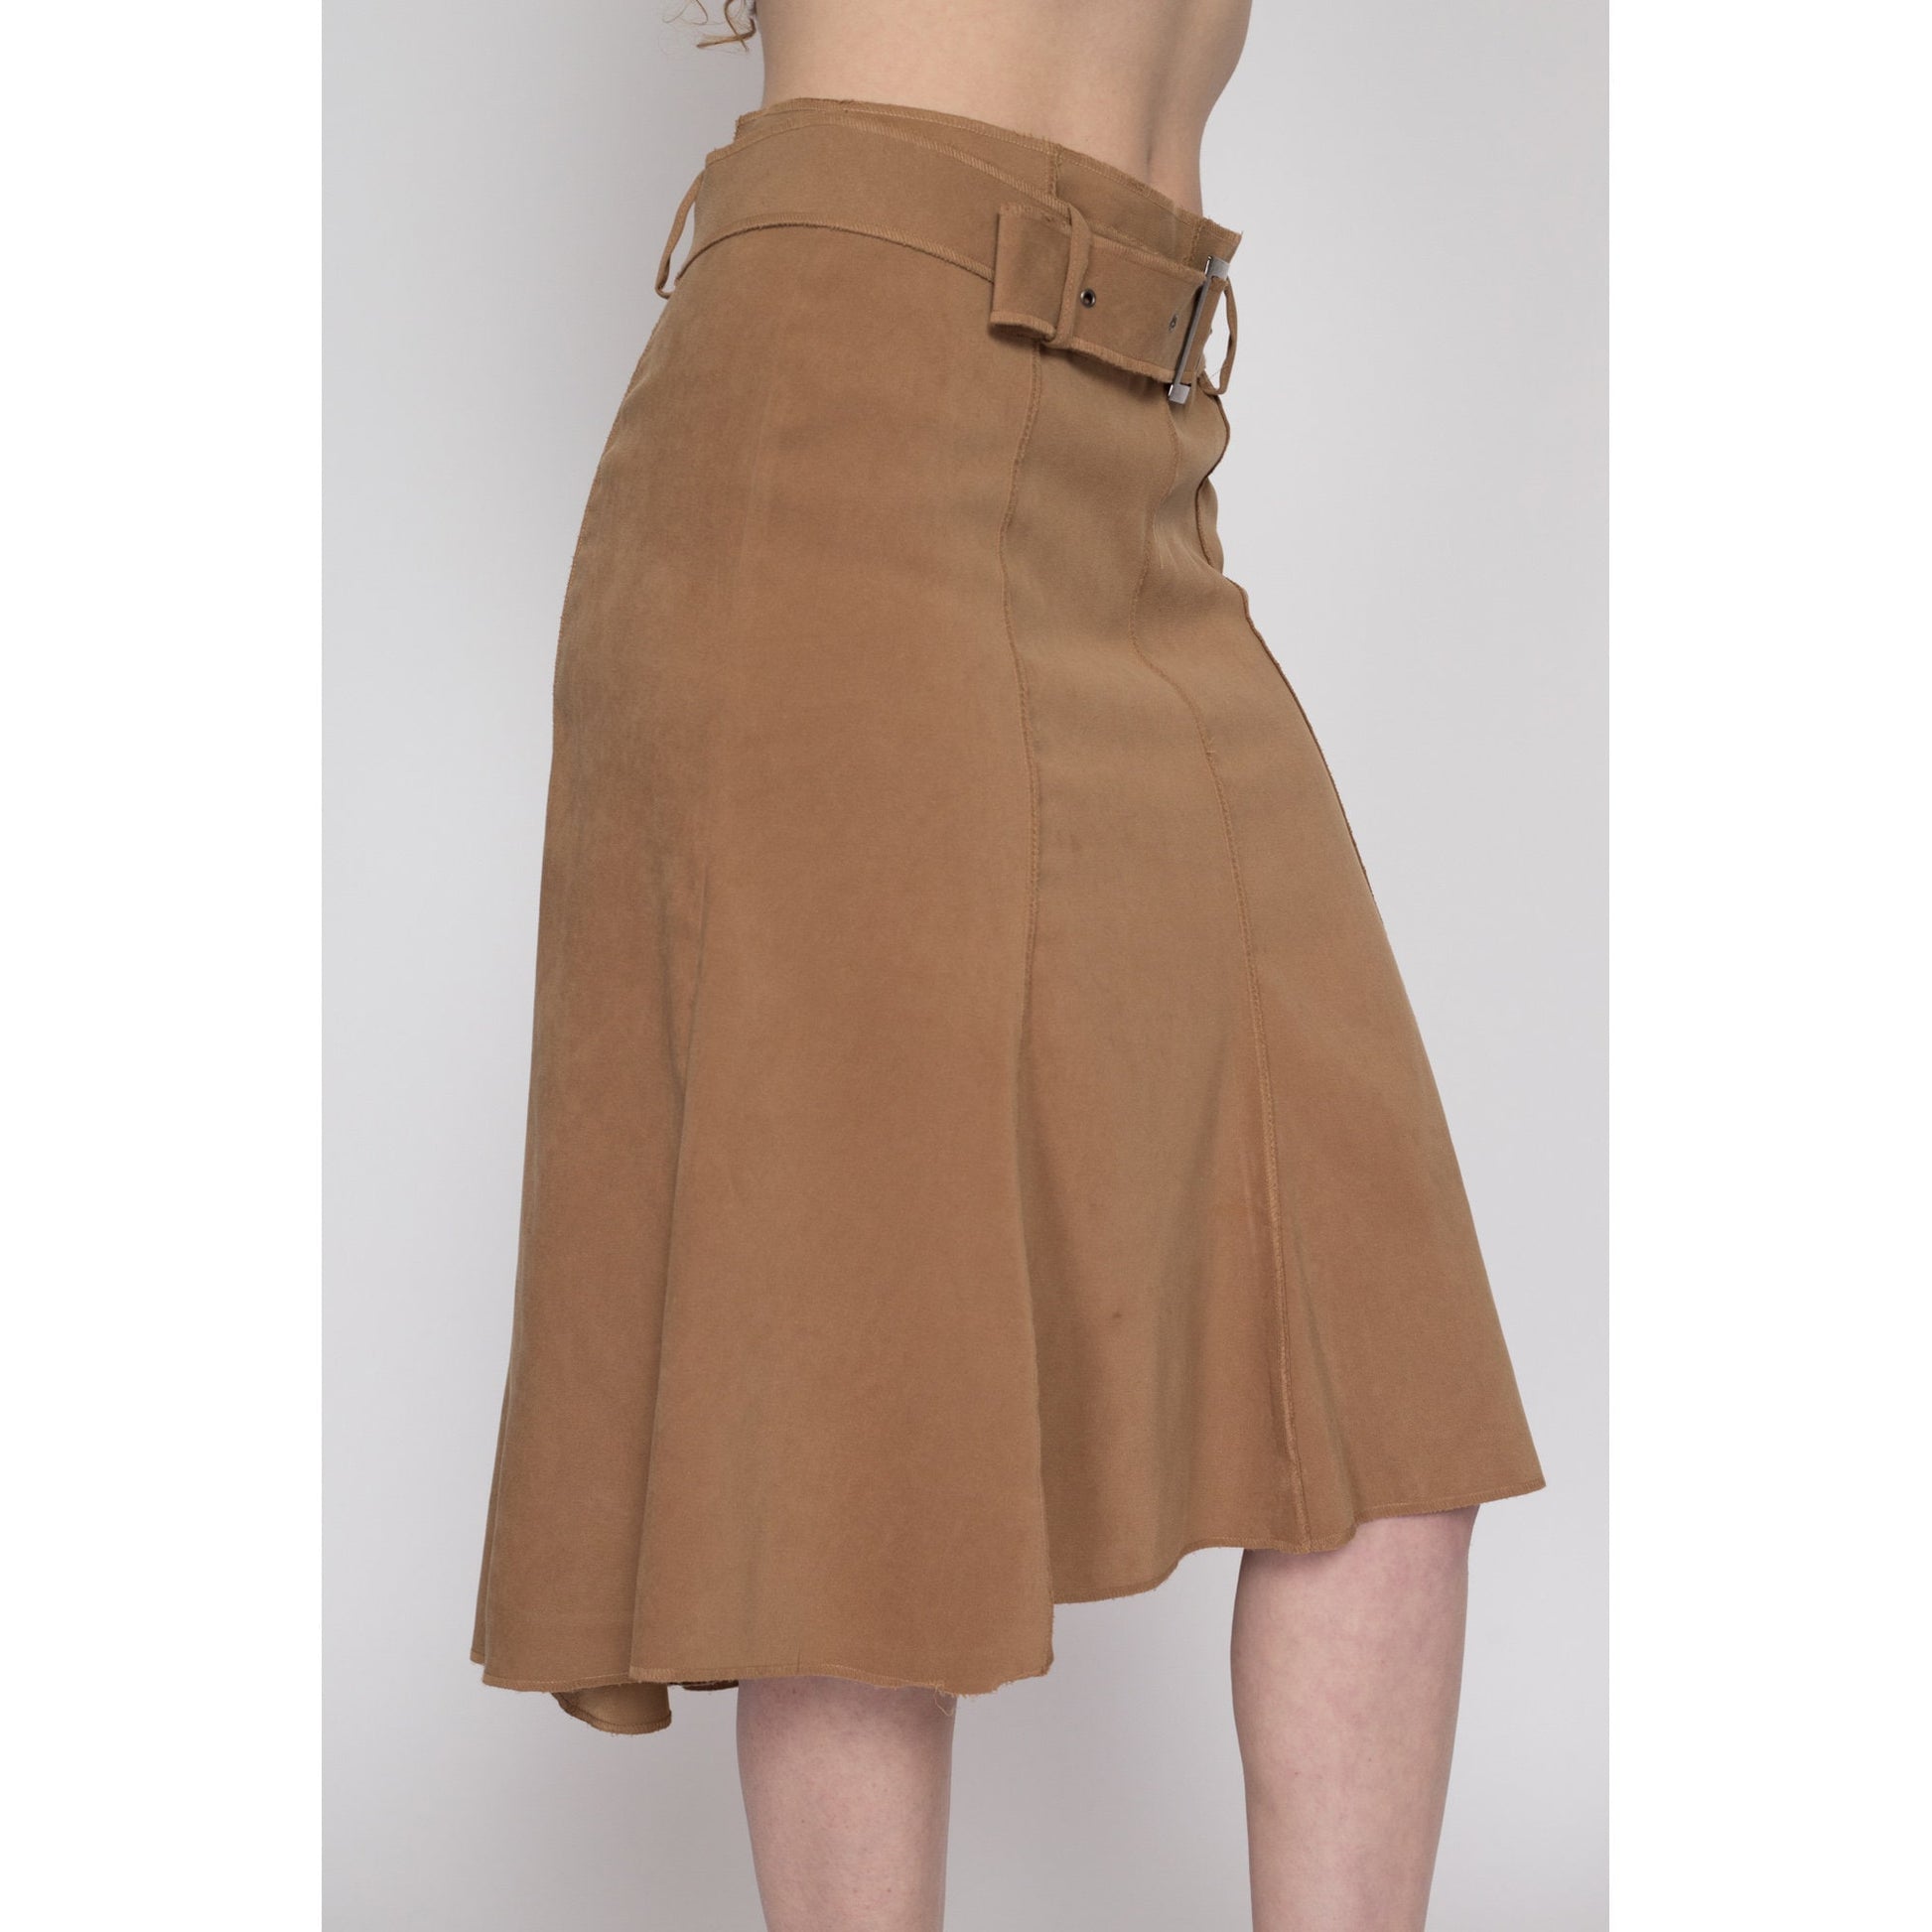 Medium 90s Brown Belted High-Low Midi Skirt 30" | Vintage High Waisted A Line Skirt